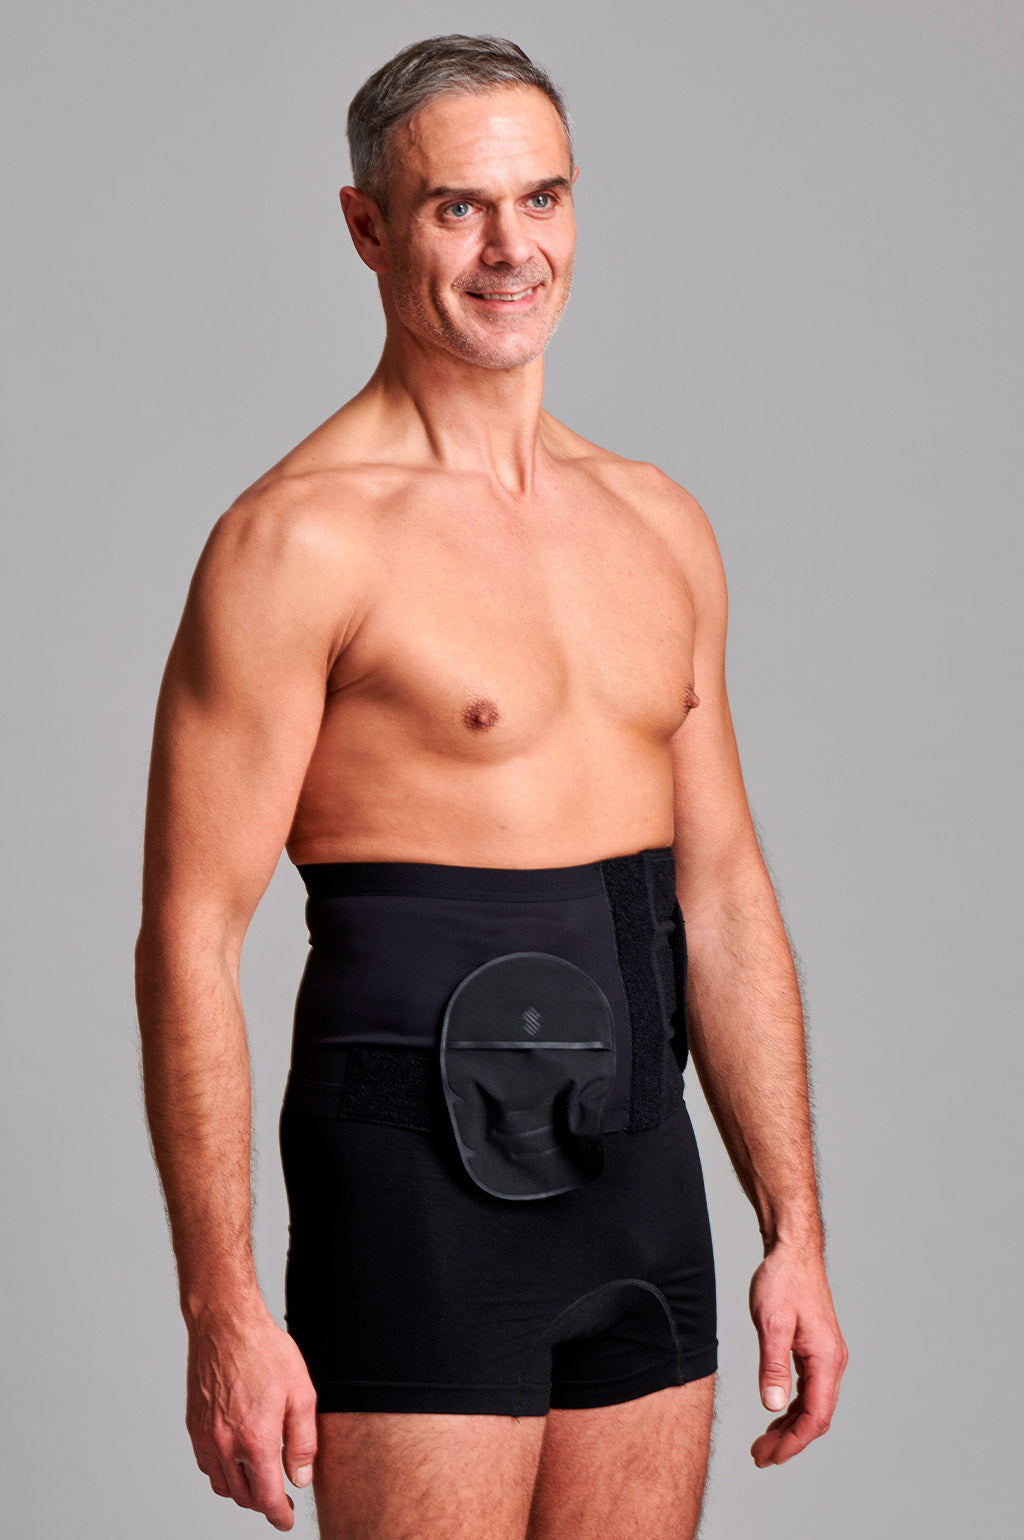 Maxbell Abdominal Belt Adjustable Colostomy Soft Washable For Hernia Care  Patients at Rs 1198.00 | Abdominal Belt, रिहैबिटेशन बेल्ट, रिहैबिलिटेशन  बेल्ट, पुनर्वास पेटी - Aladdin Shoppers, New Delhi | ID ...